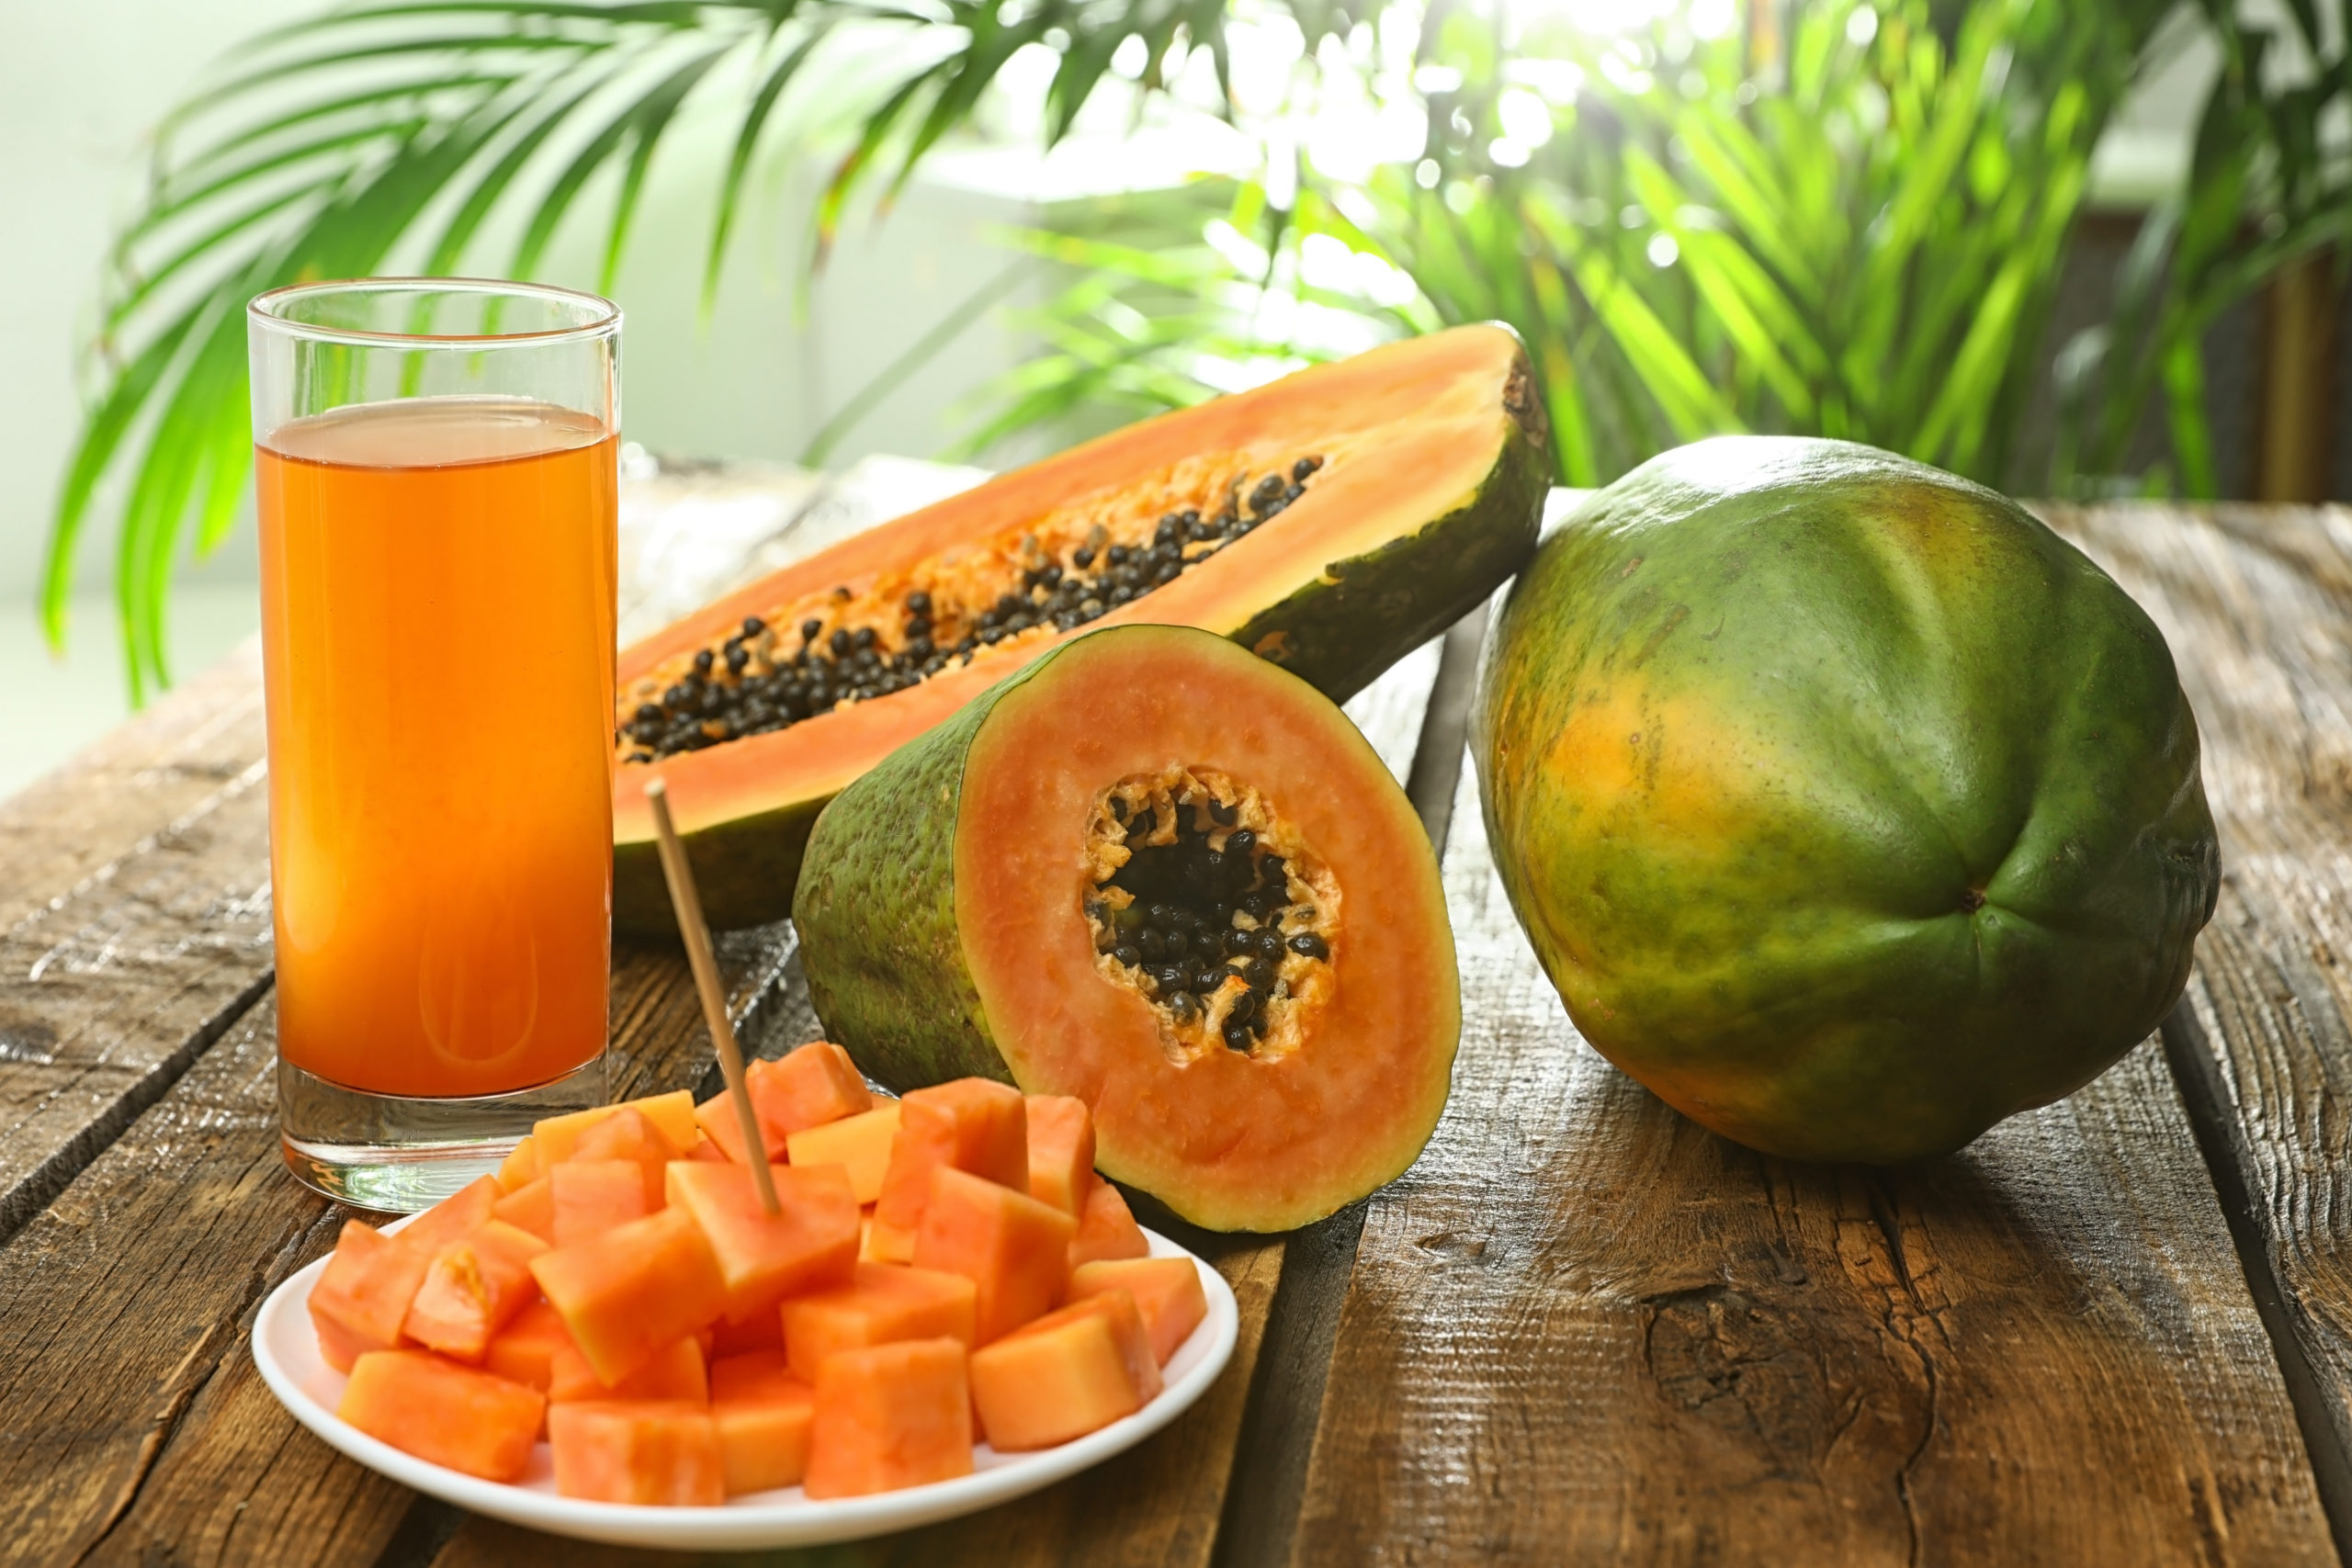 Fresh papayas and juice on wooden table against blurred background